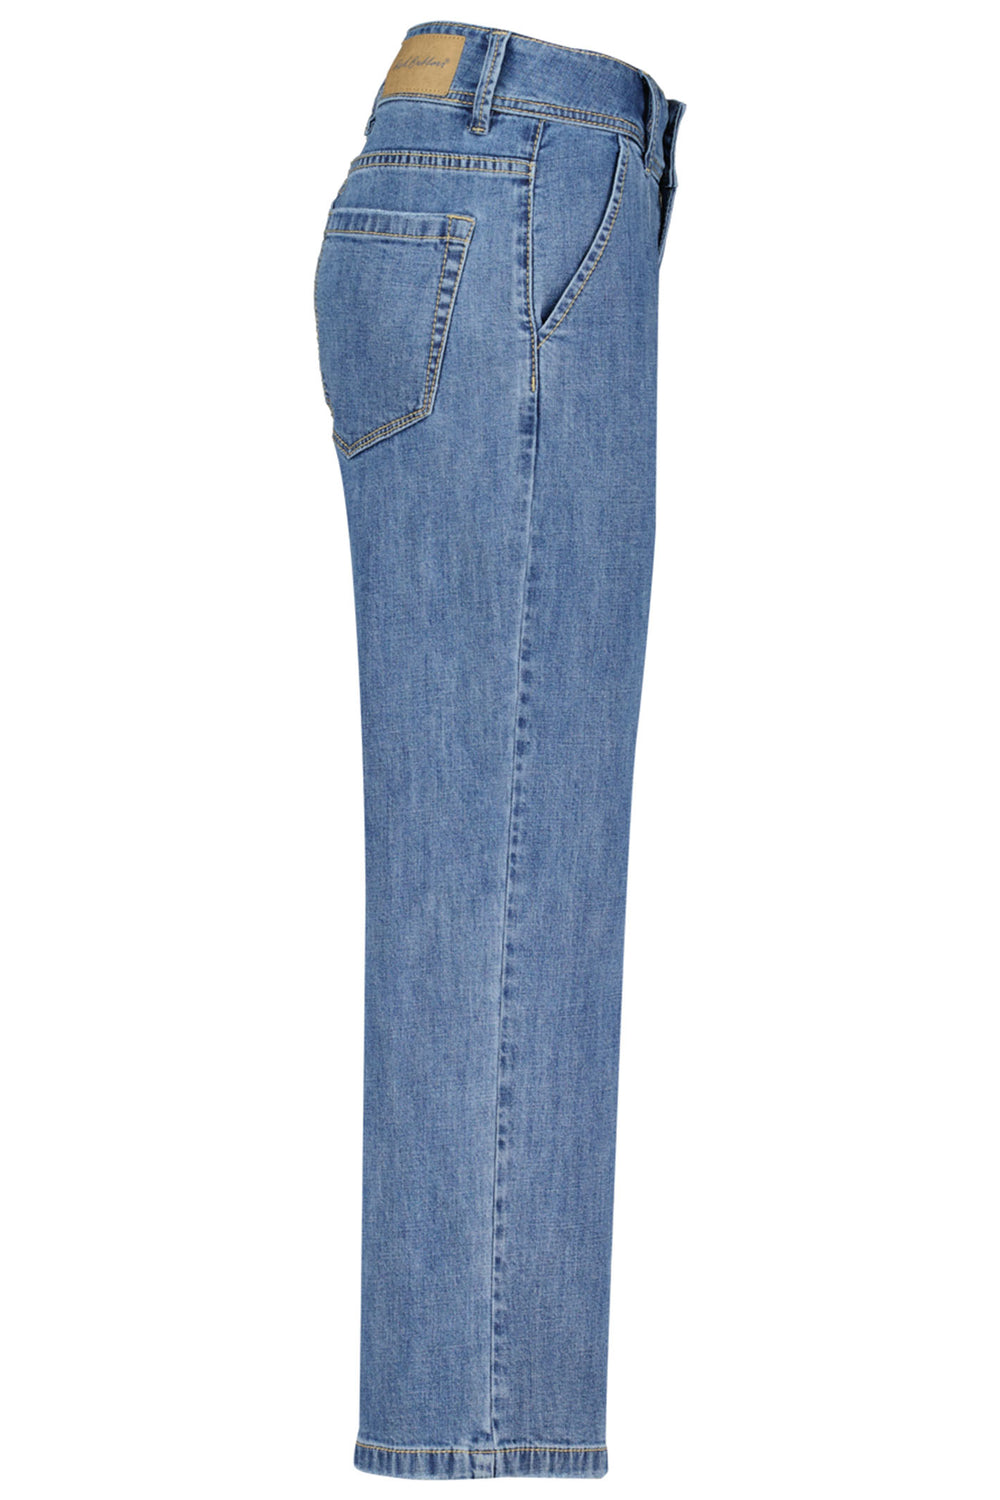 Red Button SRB4228 Conny Blue Midstone Used High Rise Jeans - Dotique